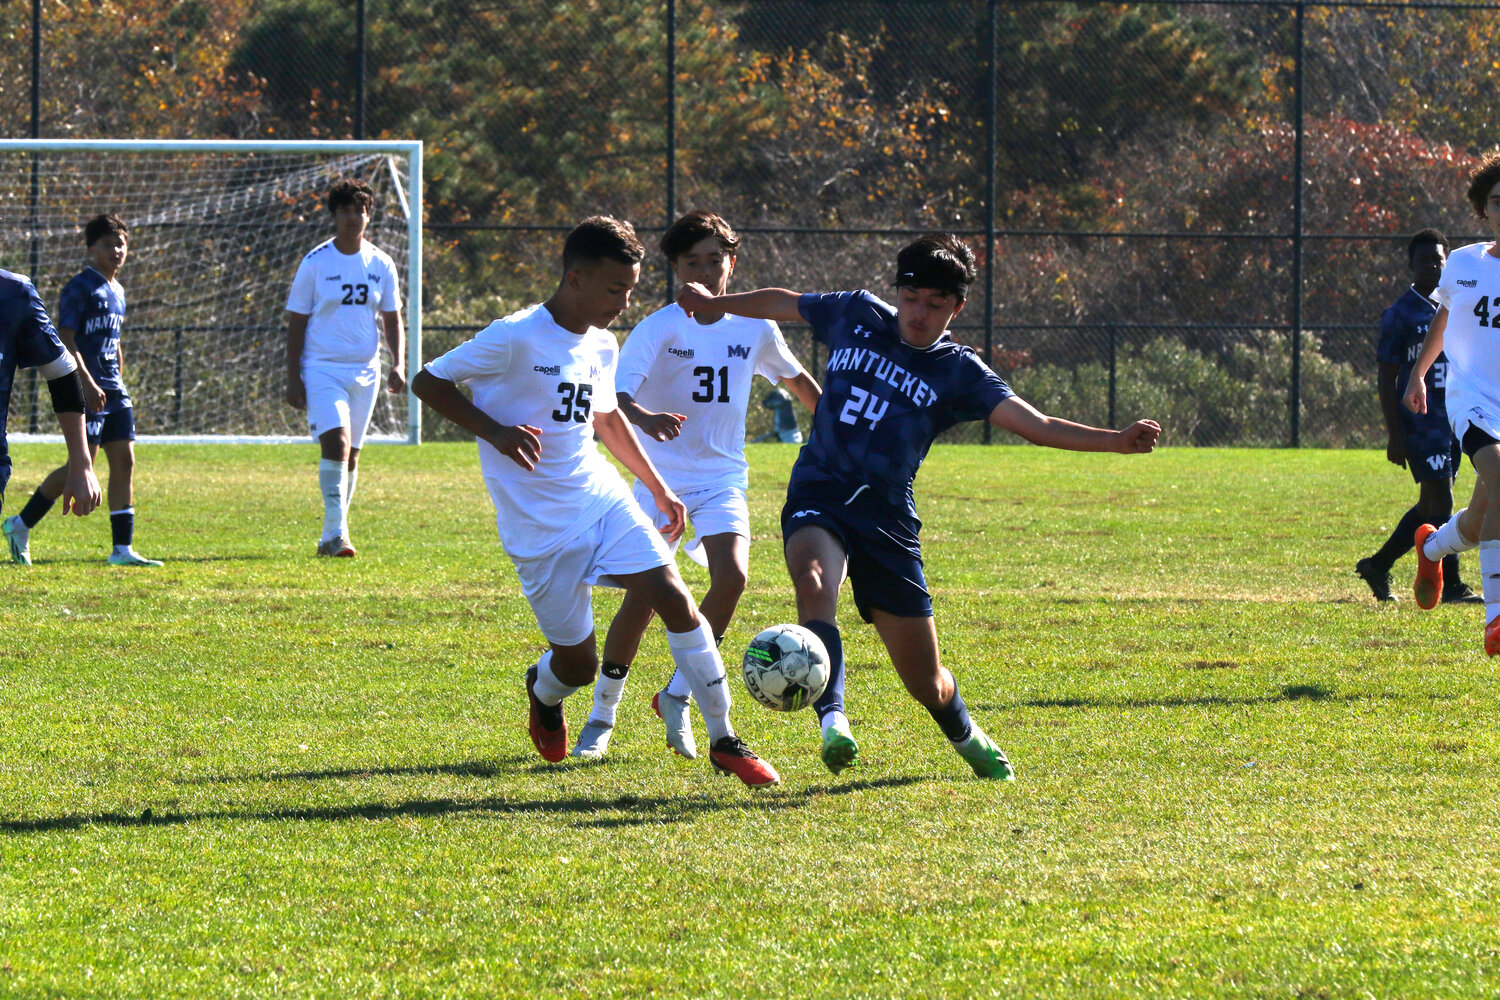 The Whalers JV boys soccer team finished the season with a record of 6-4-1.